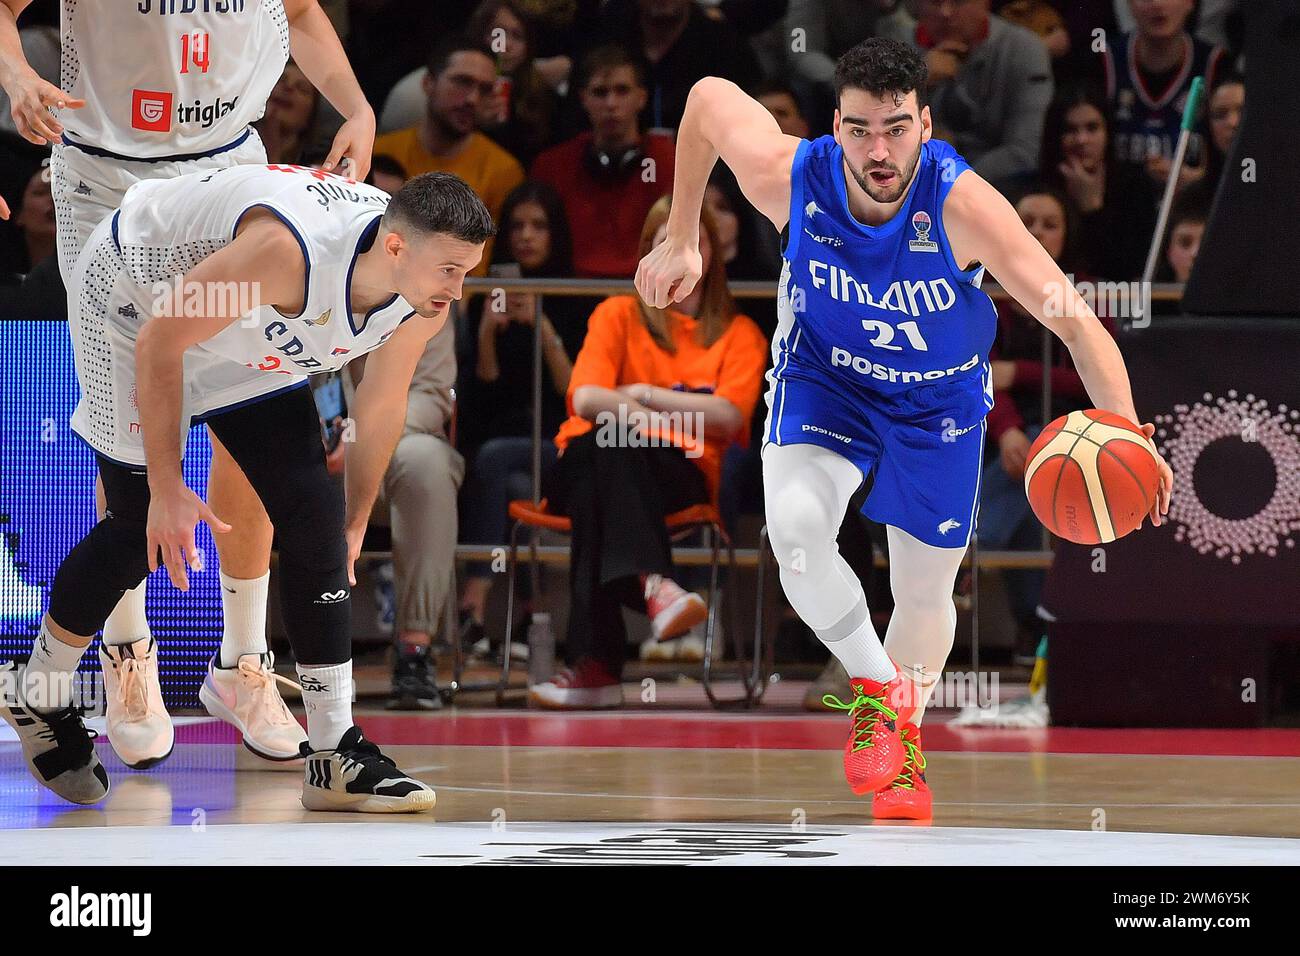 Belgrade, Serbia, 23 February, 2023. Edon Maxhuni of Finland in action during the EuroBasket 2025 Qualifiers match between Serbia and Finland at Aleksandar Nikolic in Belgrade, Serbia. February 23, 2023. Credit: Nikola Krstic/Alamy Stock Photo